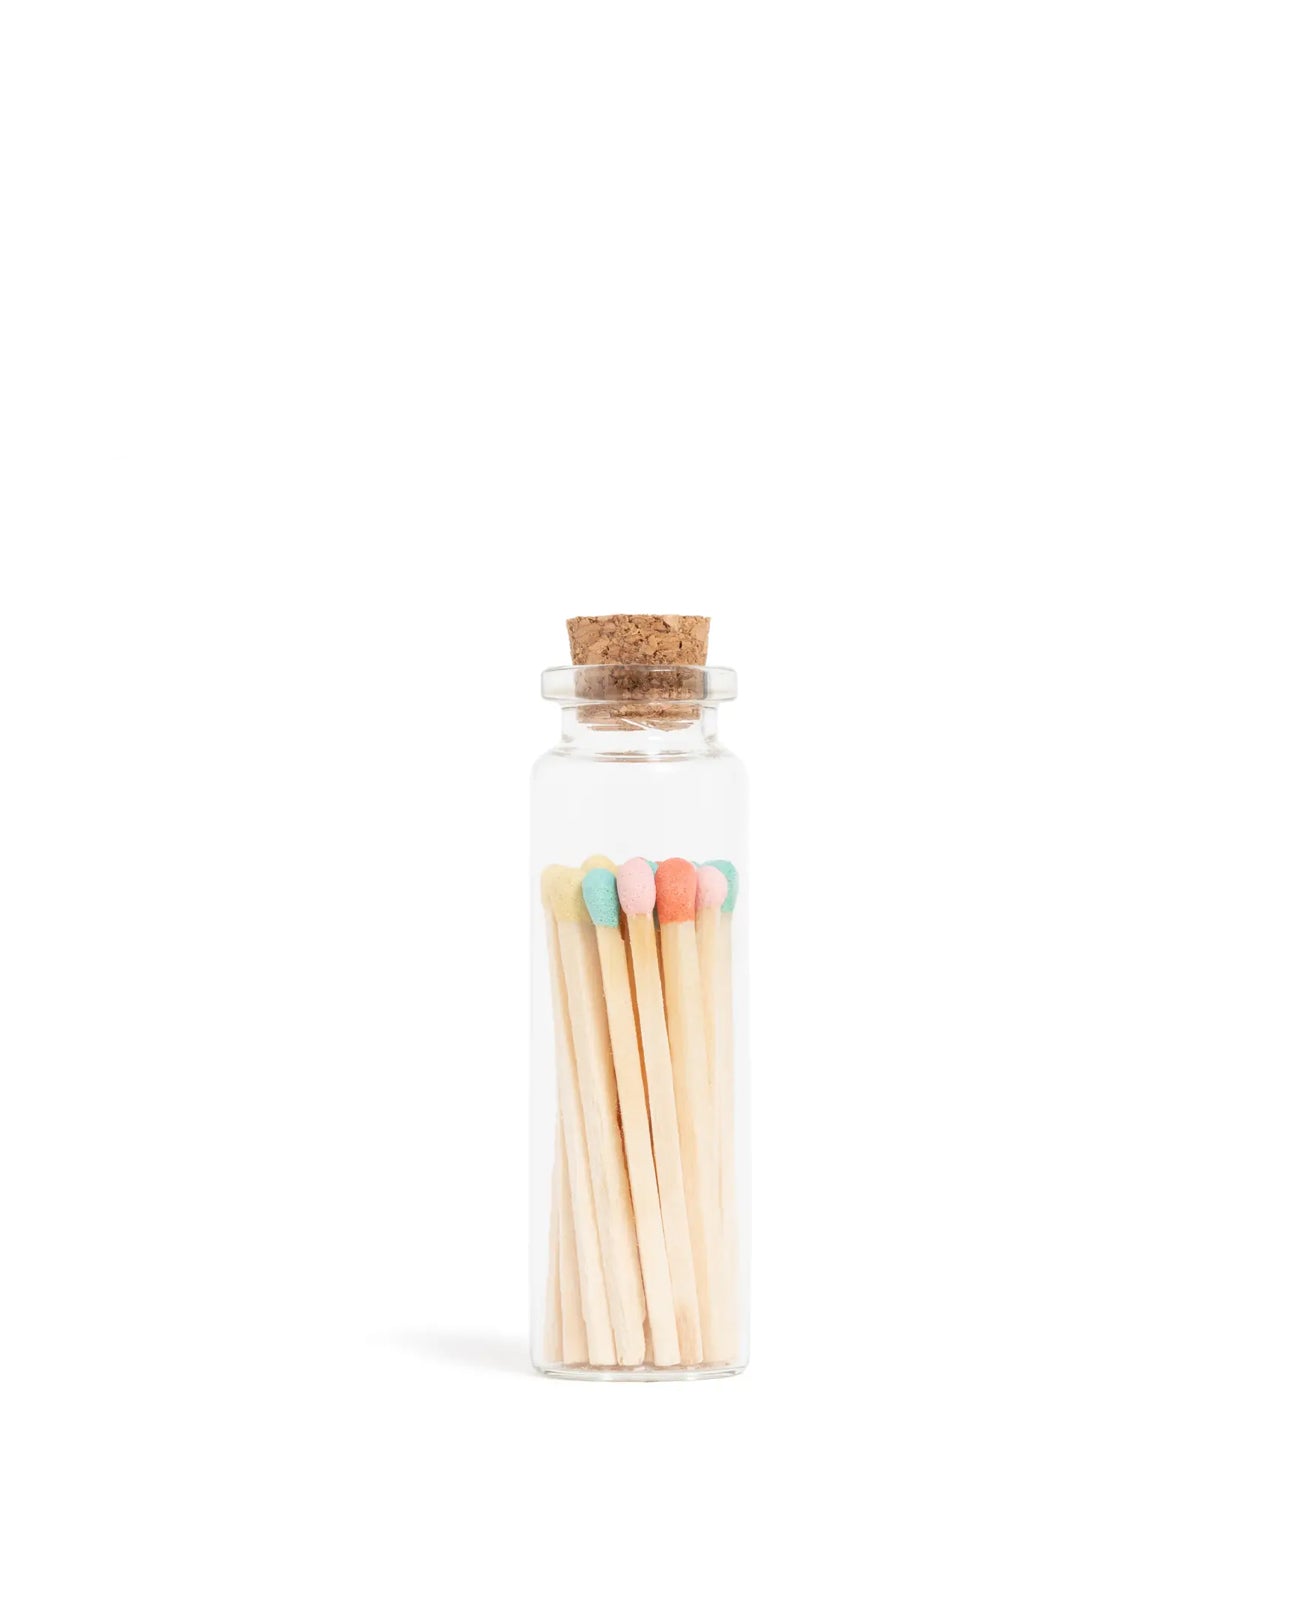 9 CHRISTOPHER Colored Matches in Corked Glass Vial